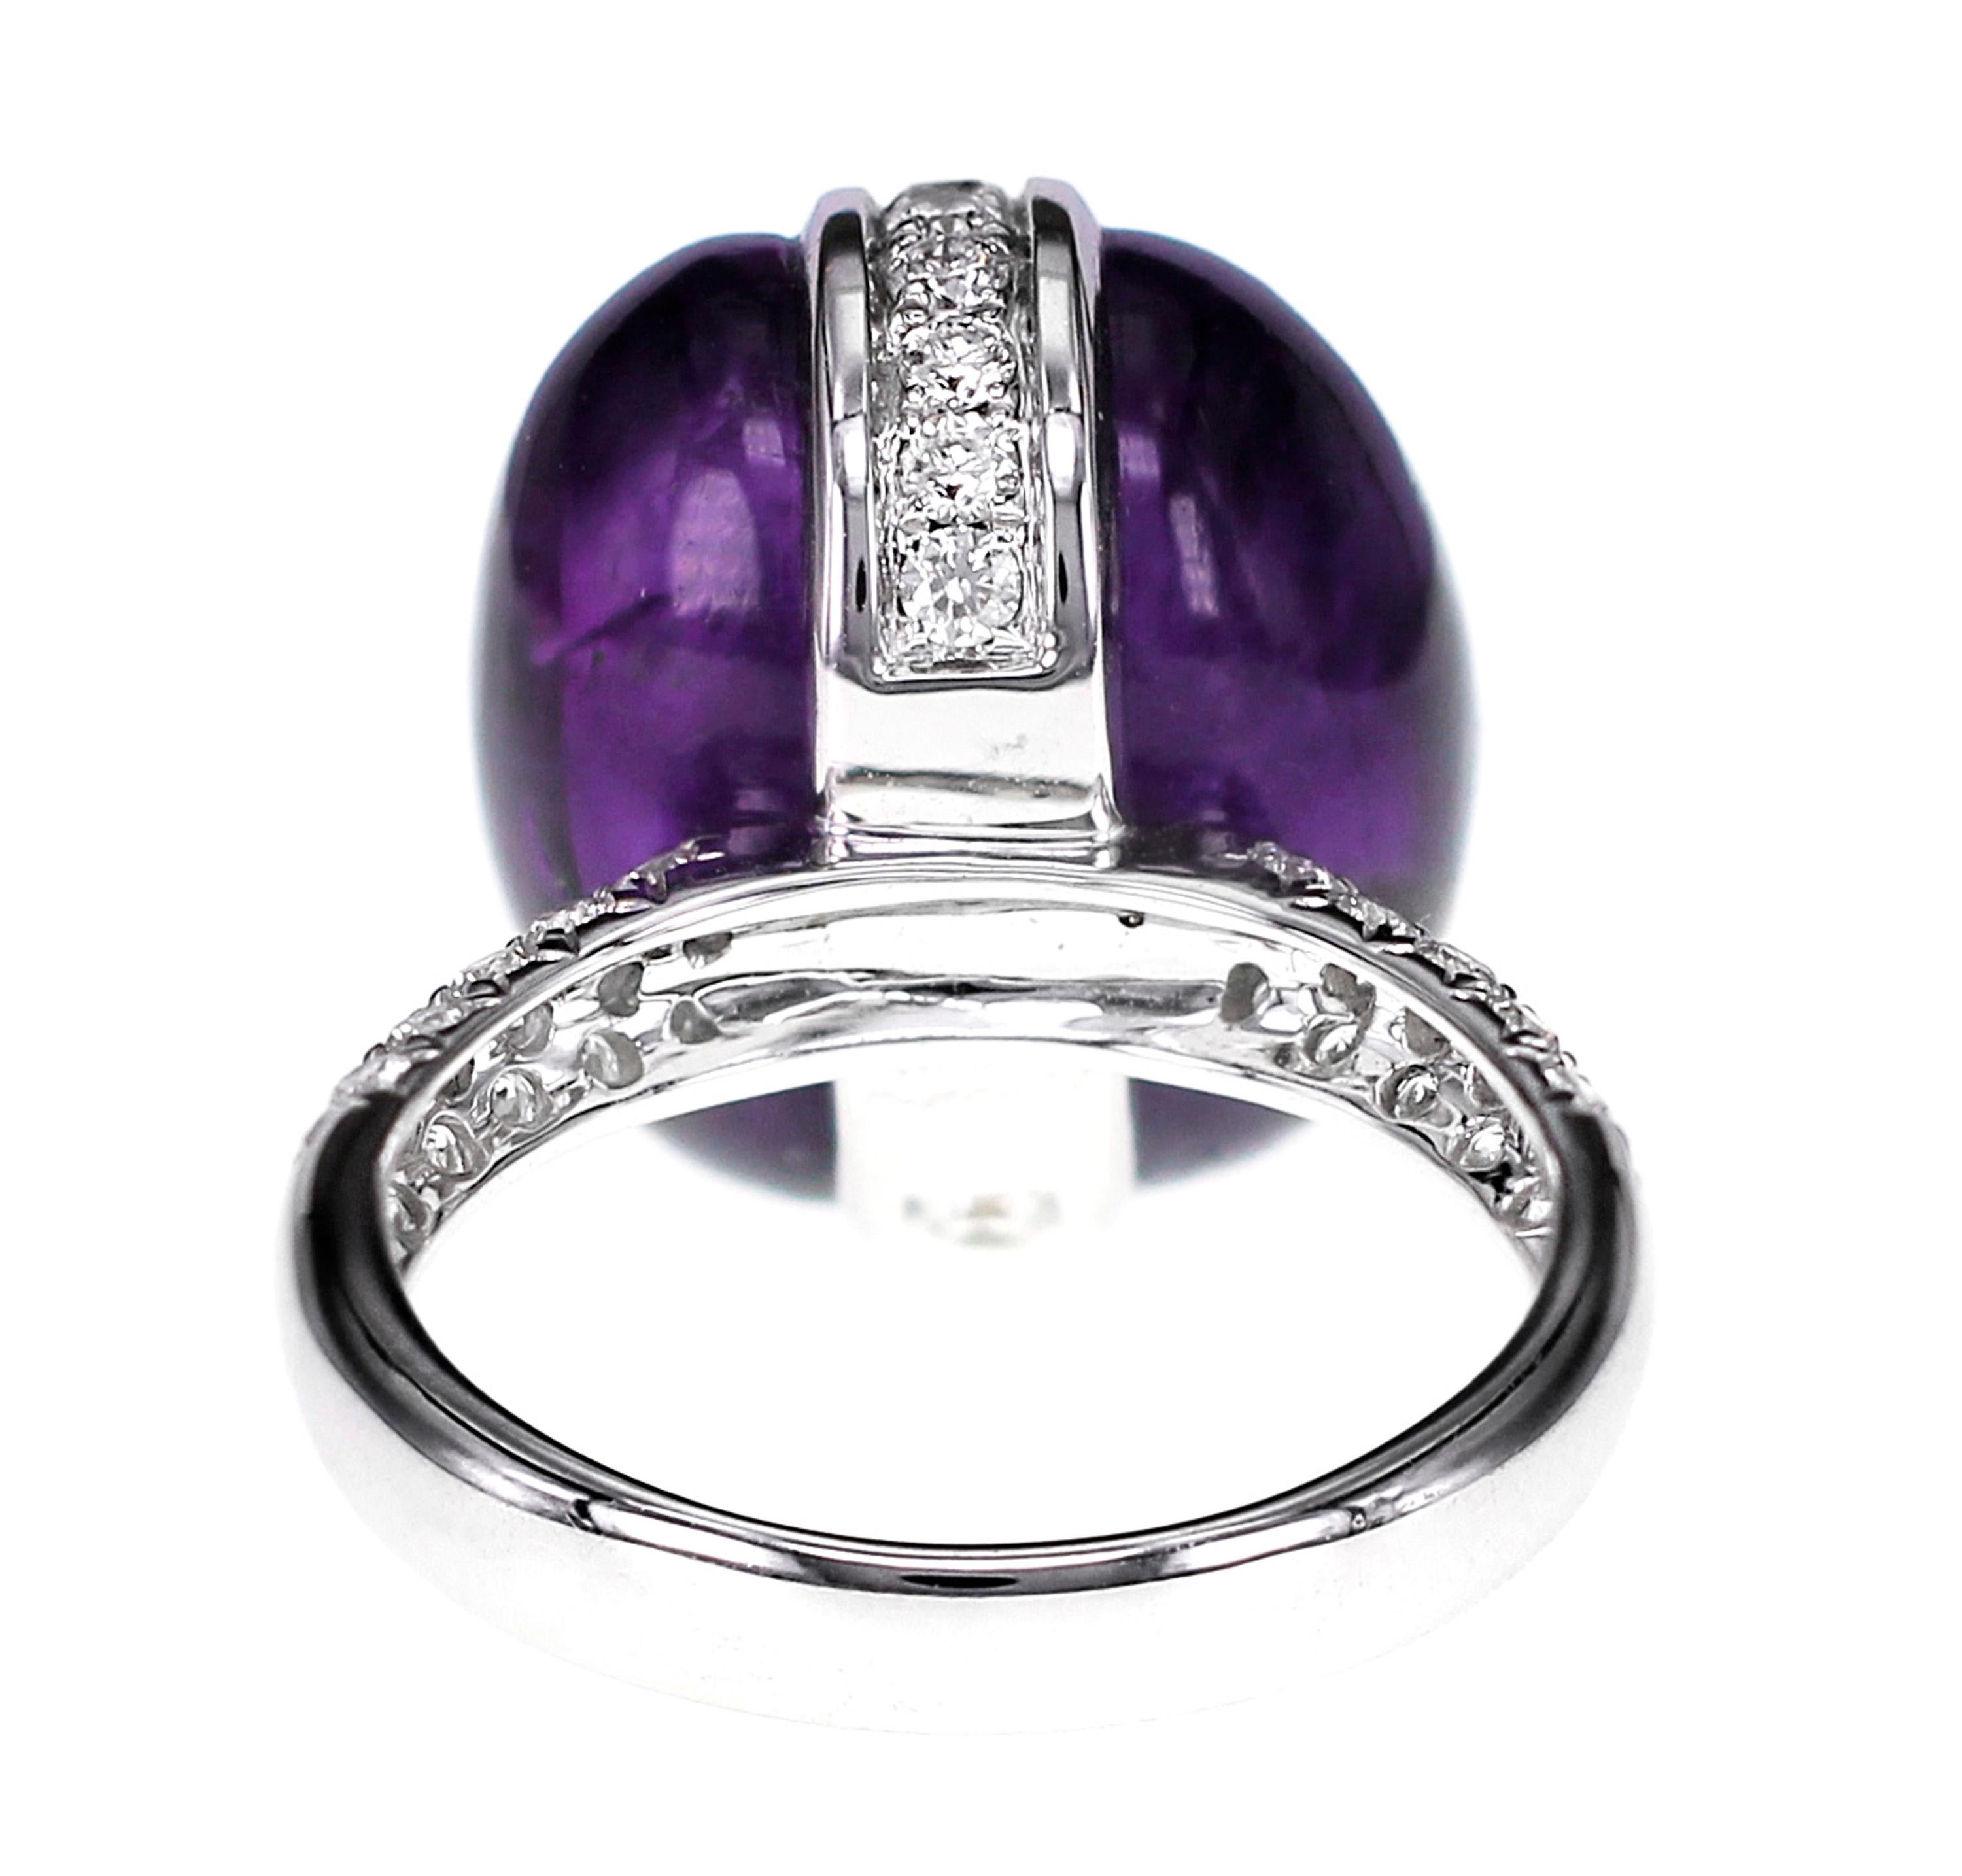 Cabochon Space Ship Inspired 21.45 Carat Amethyst and Diamond Ring